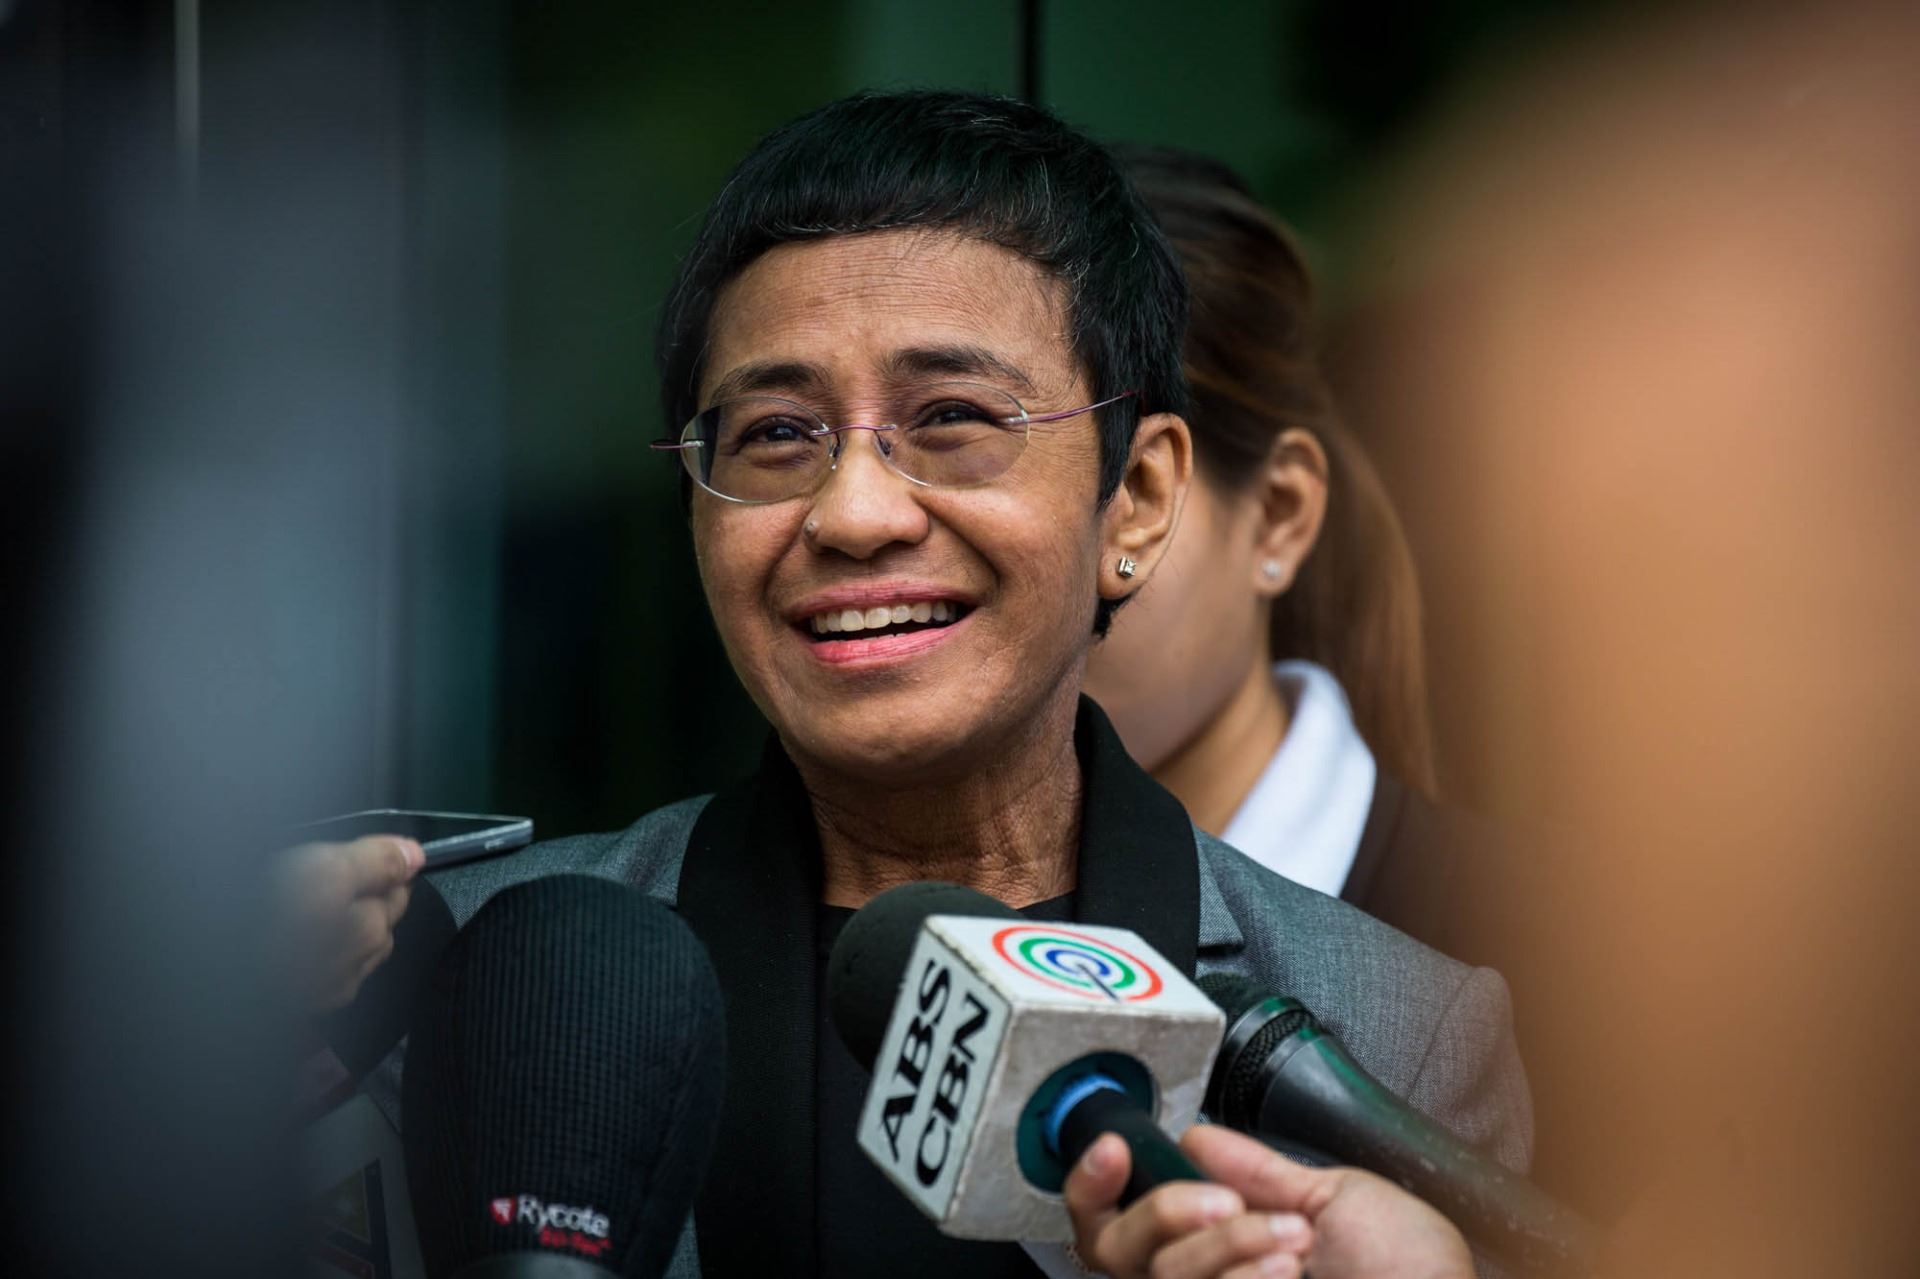 Class of 1982 High School North graduate Maria Ressa has forged a journalistic career marked by bravery, integrity, and justice, and has recently been nominated for a Nobel Peace Prize. She recently spoke with HSN Principal Ed Keller. (Photo: Rappler.com and Maria Ressa)